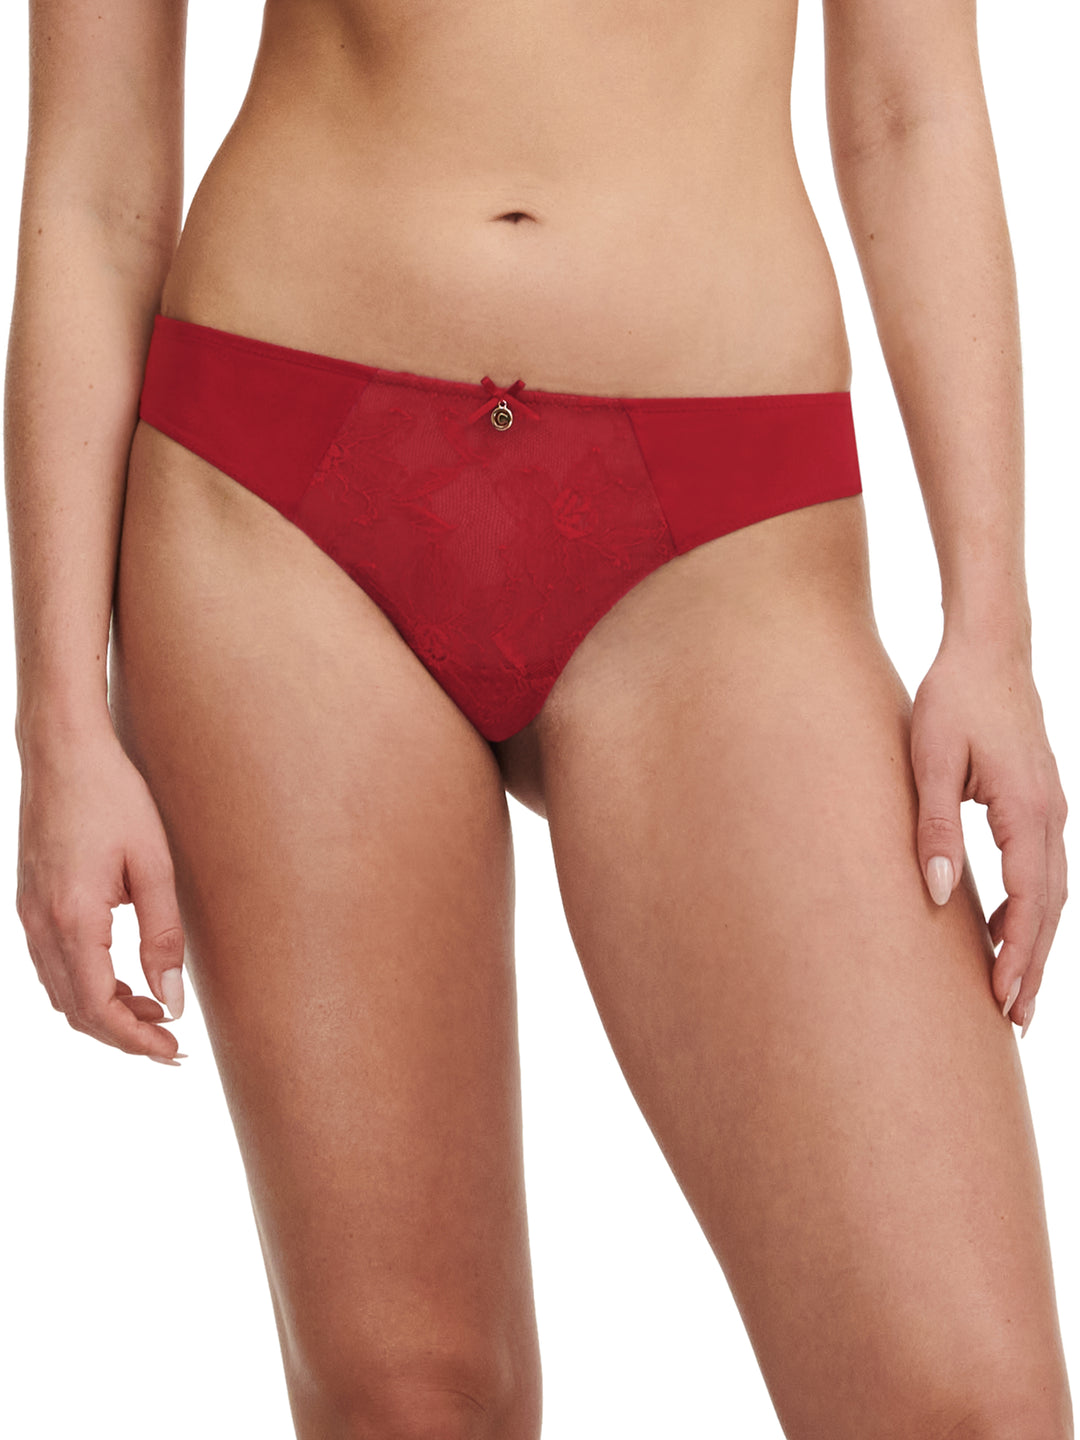 Chantelle - Orchidee Tanga Rosso Passione